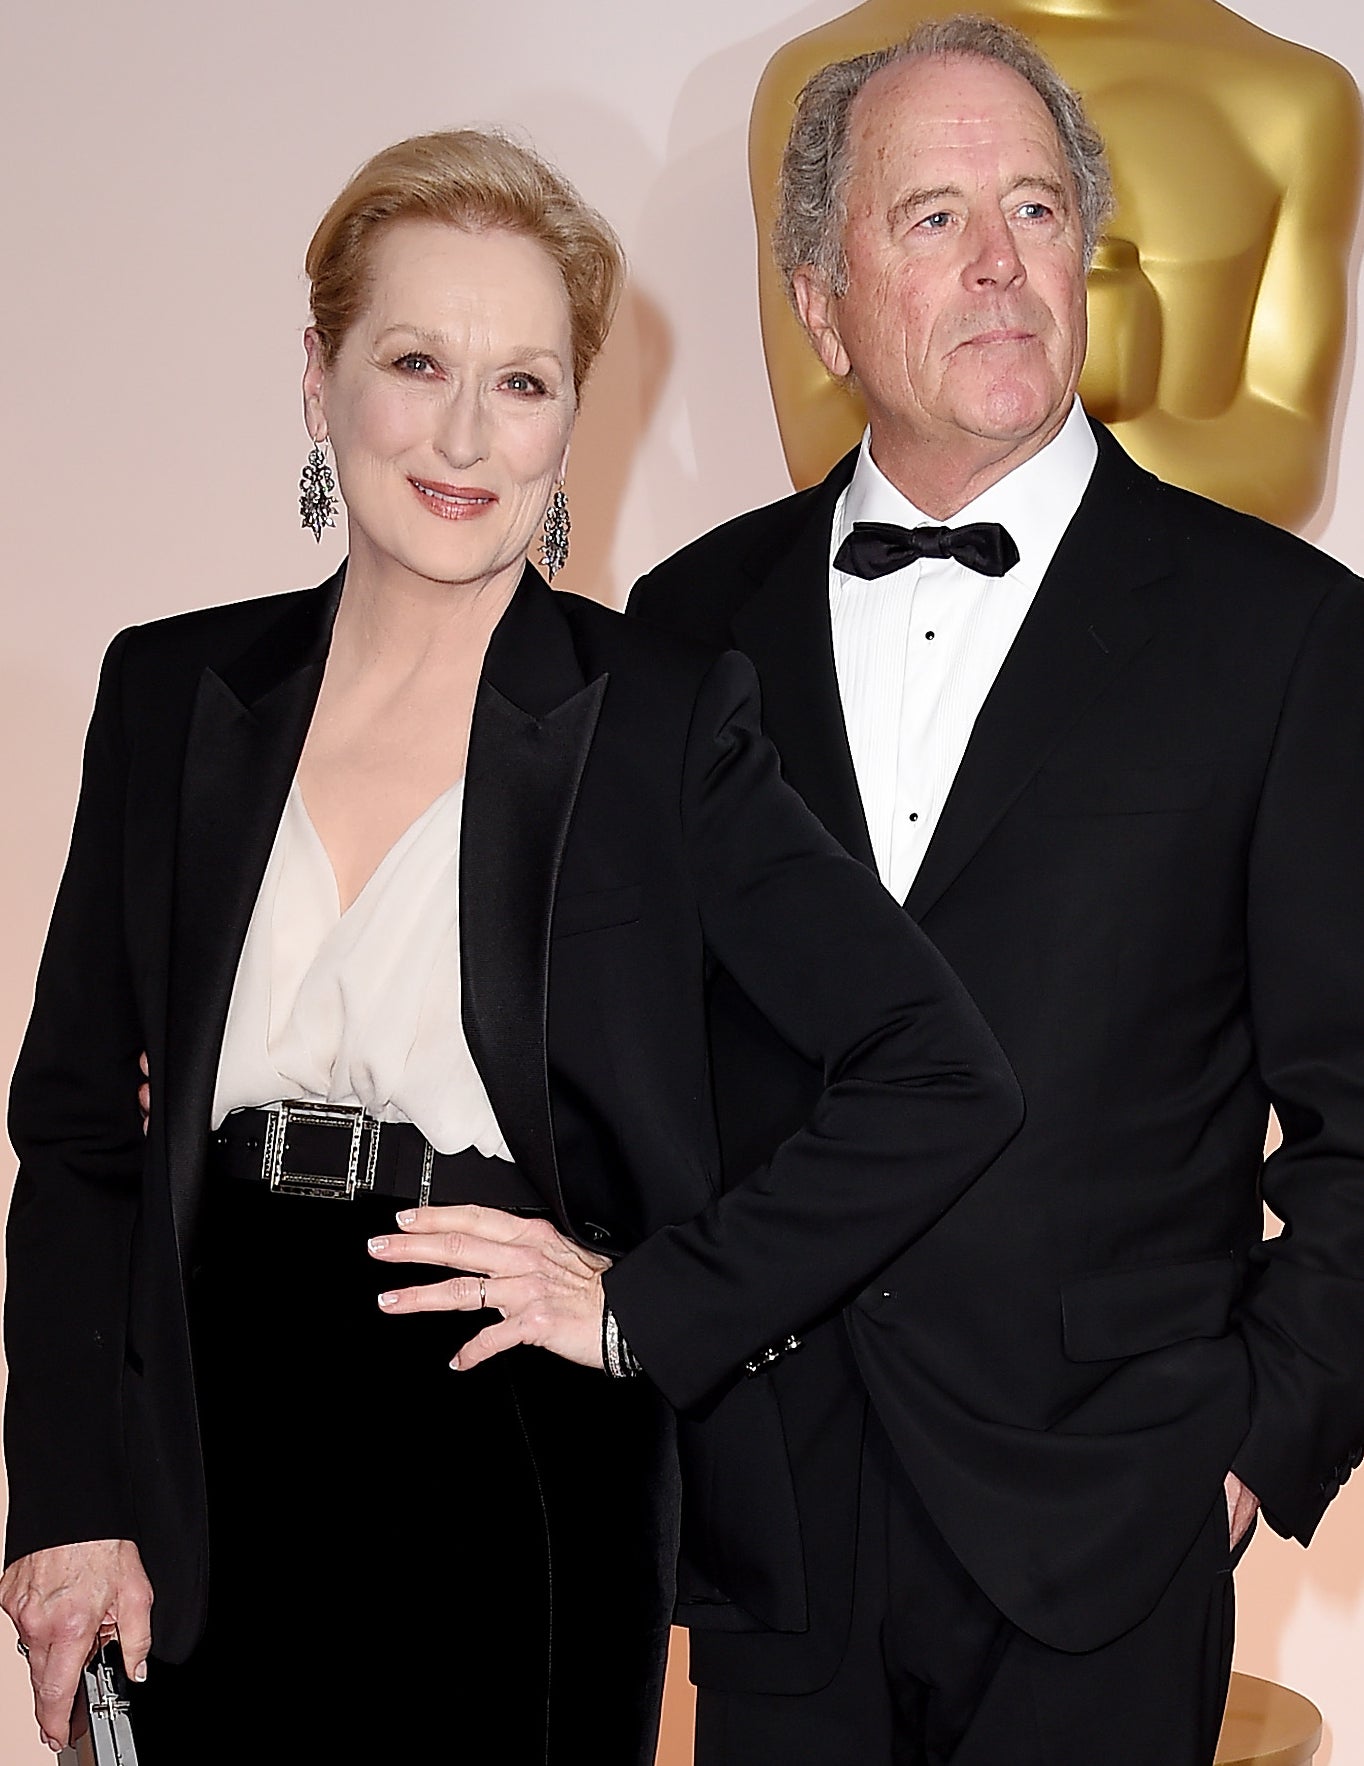 Close-up of Meryl and Don at a press event